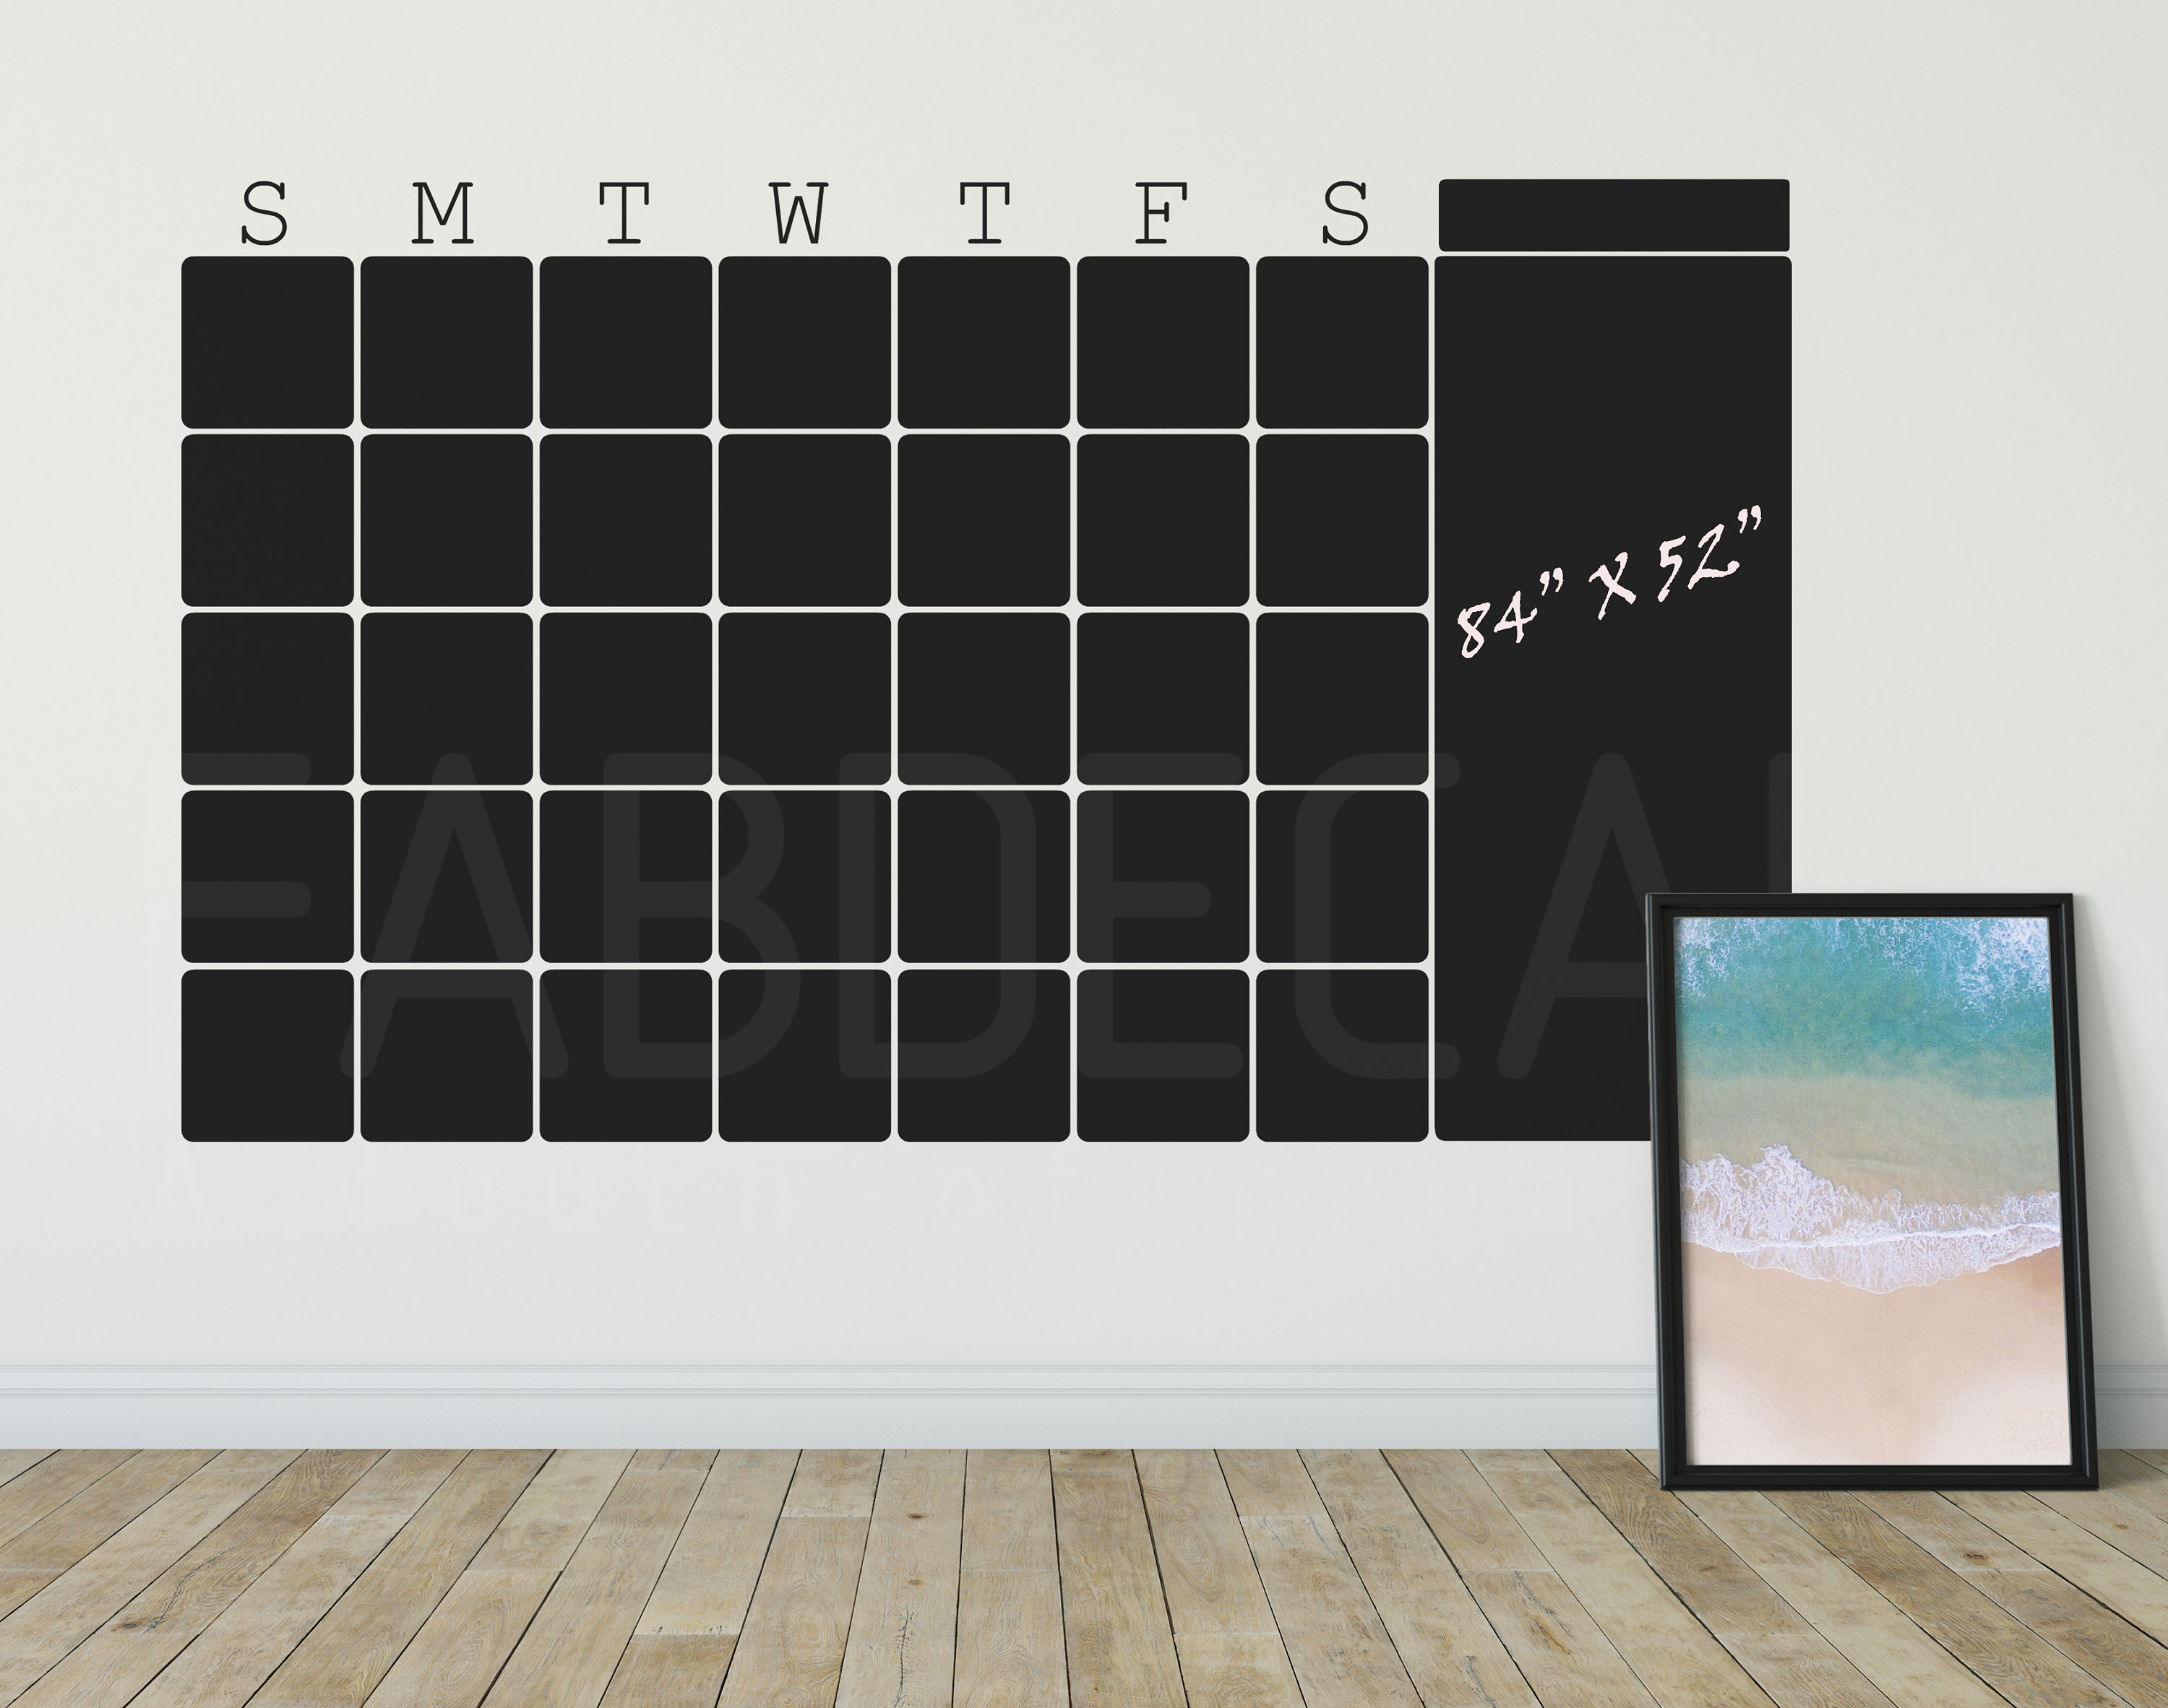 Extra Large Monthly Chalkboard Calendar Wall Decal  Id408 for Extra Large Photo Calendar